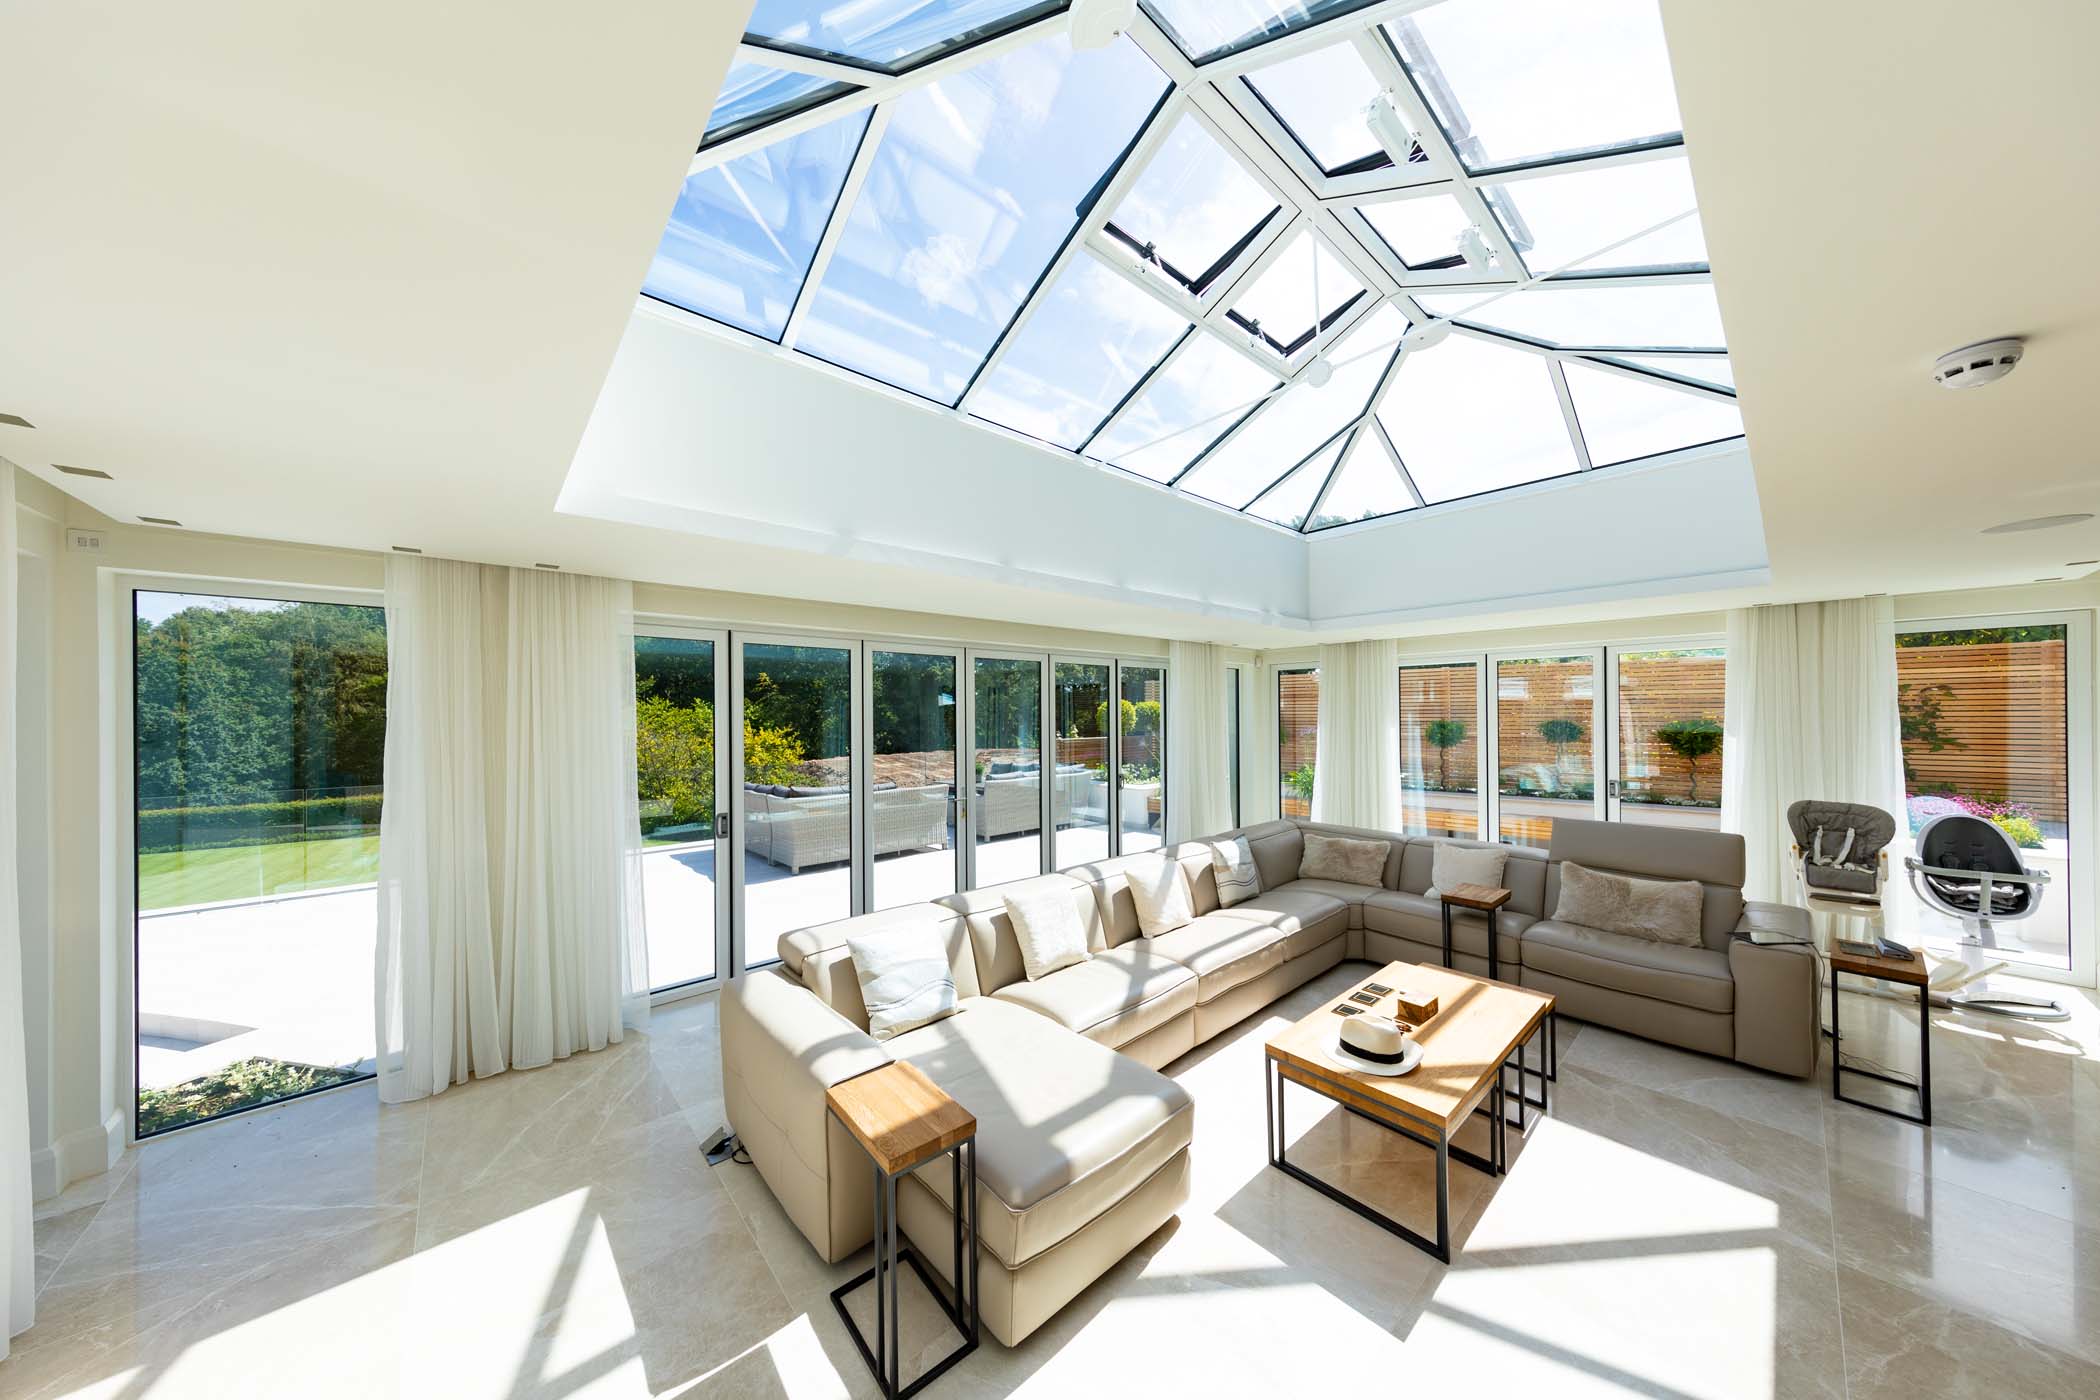 a living area with large glass and aluminium windows with a sloped glazed roof